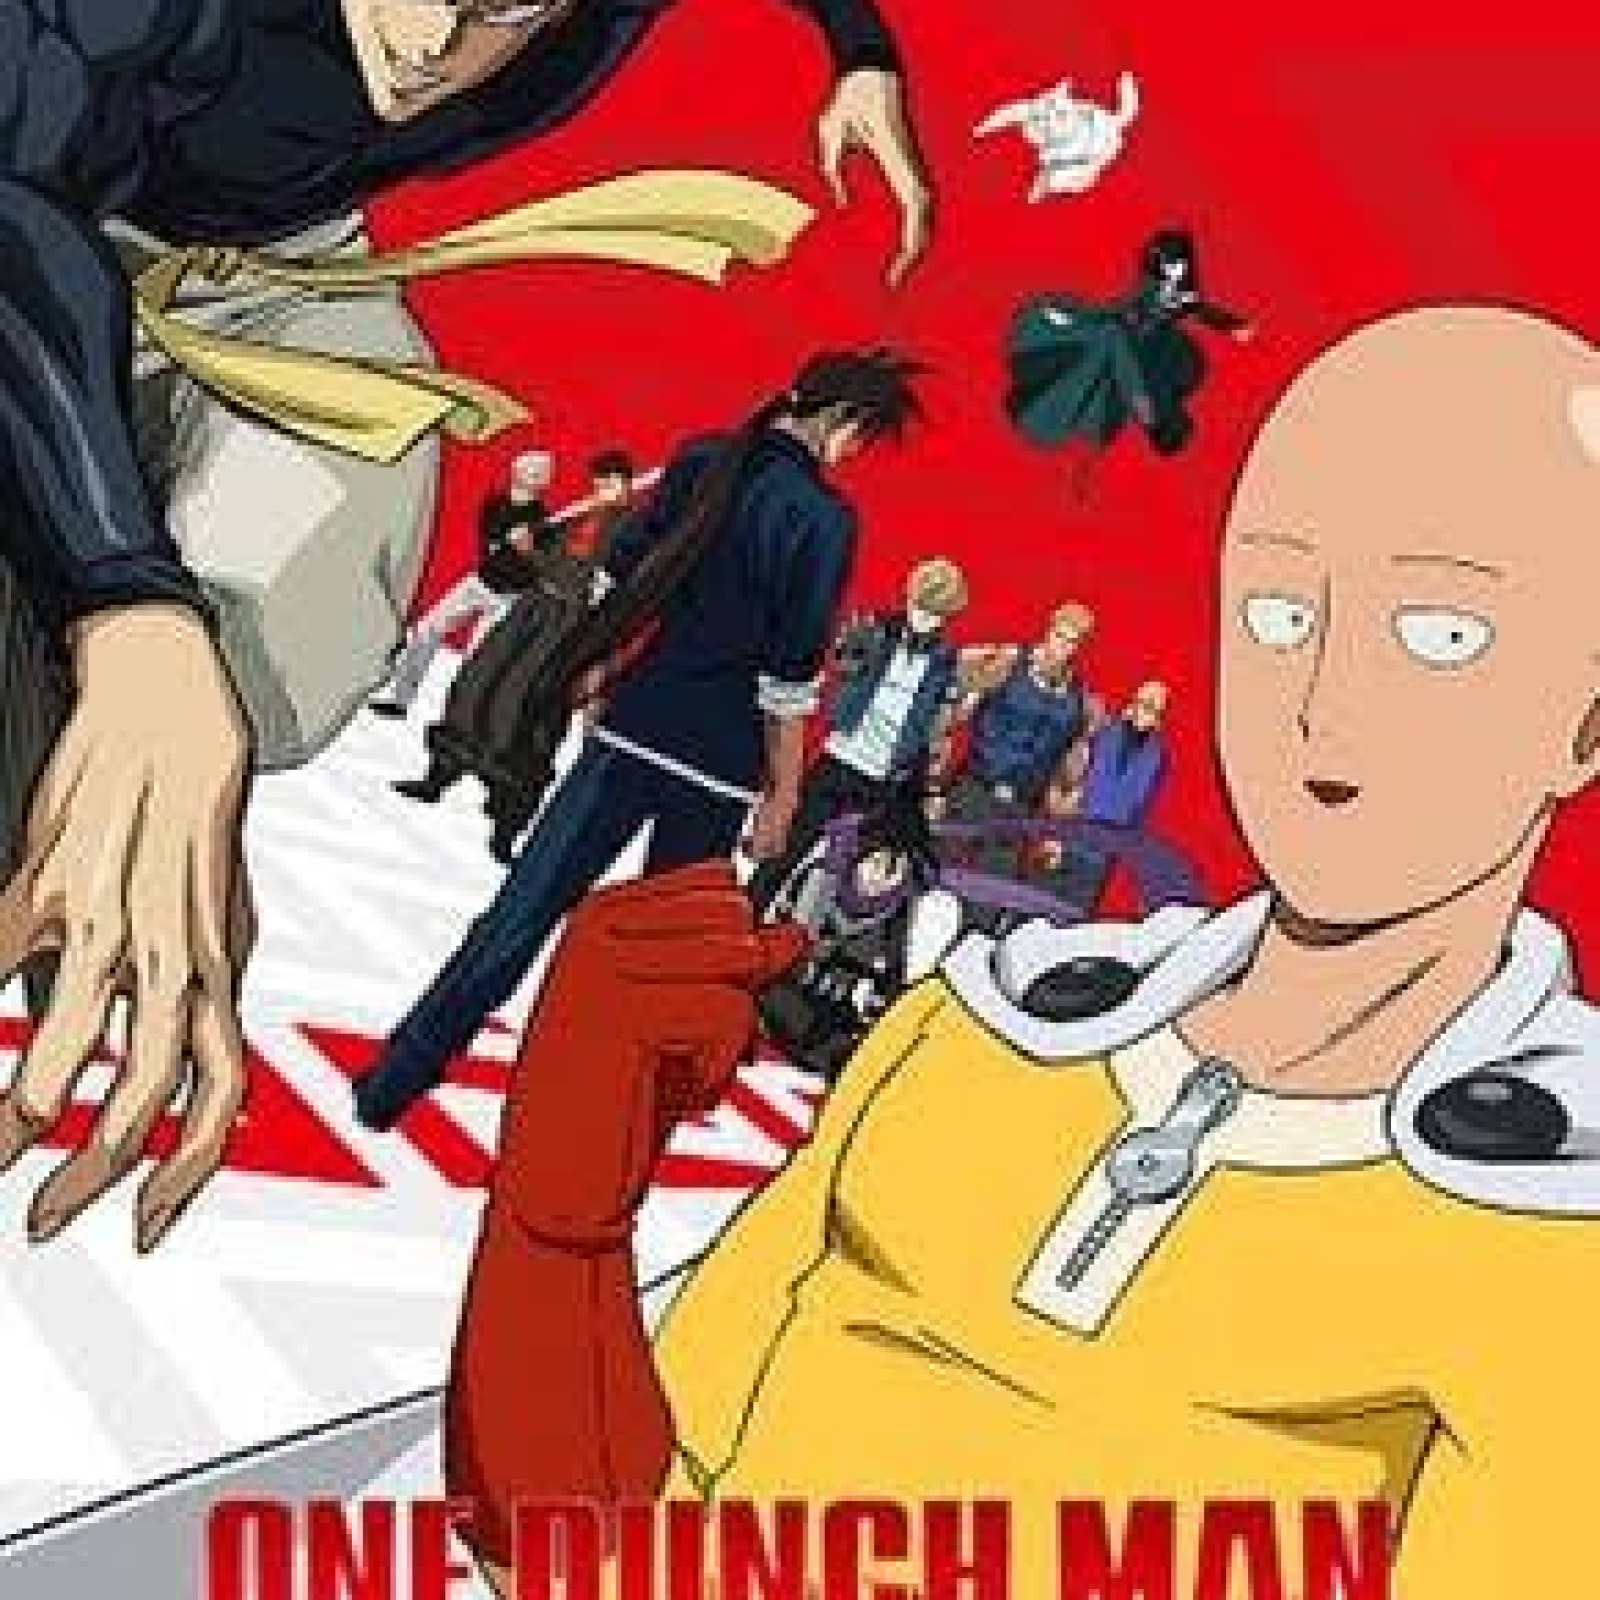 Could One-Punch Man Season 3 Return To Madhouse?